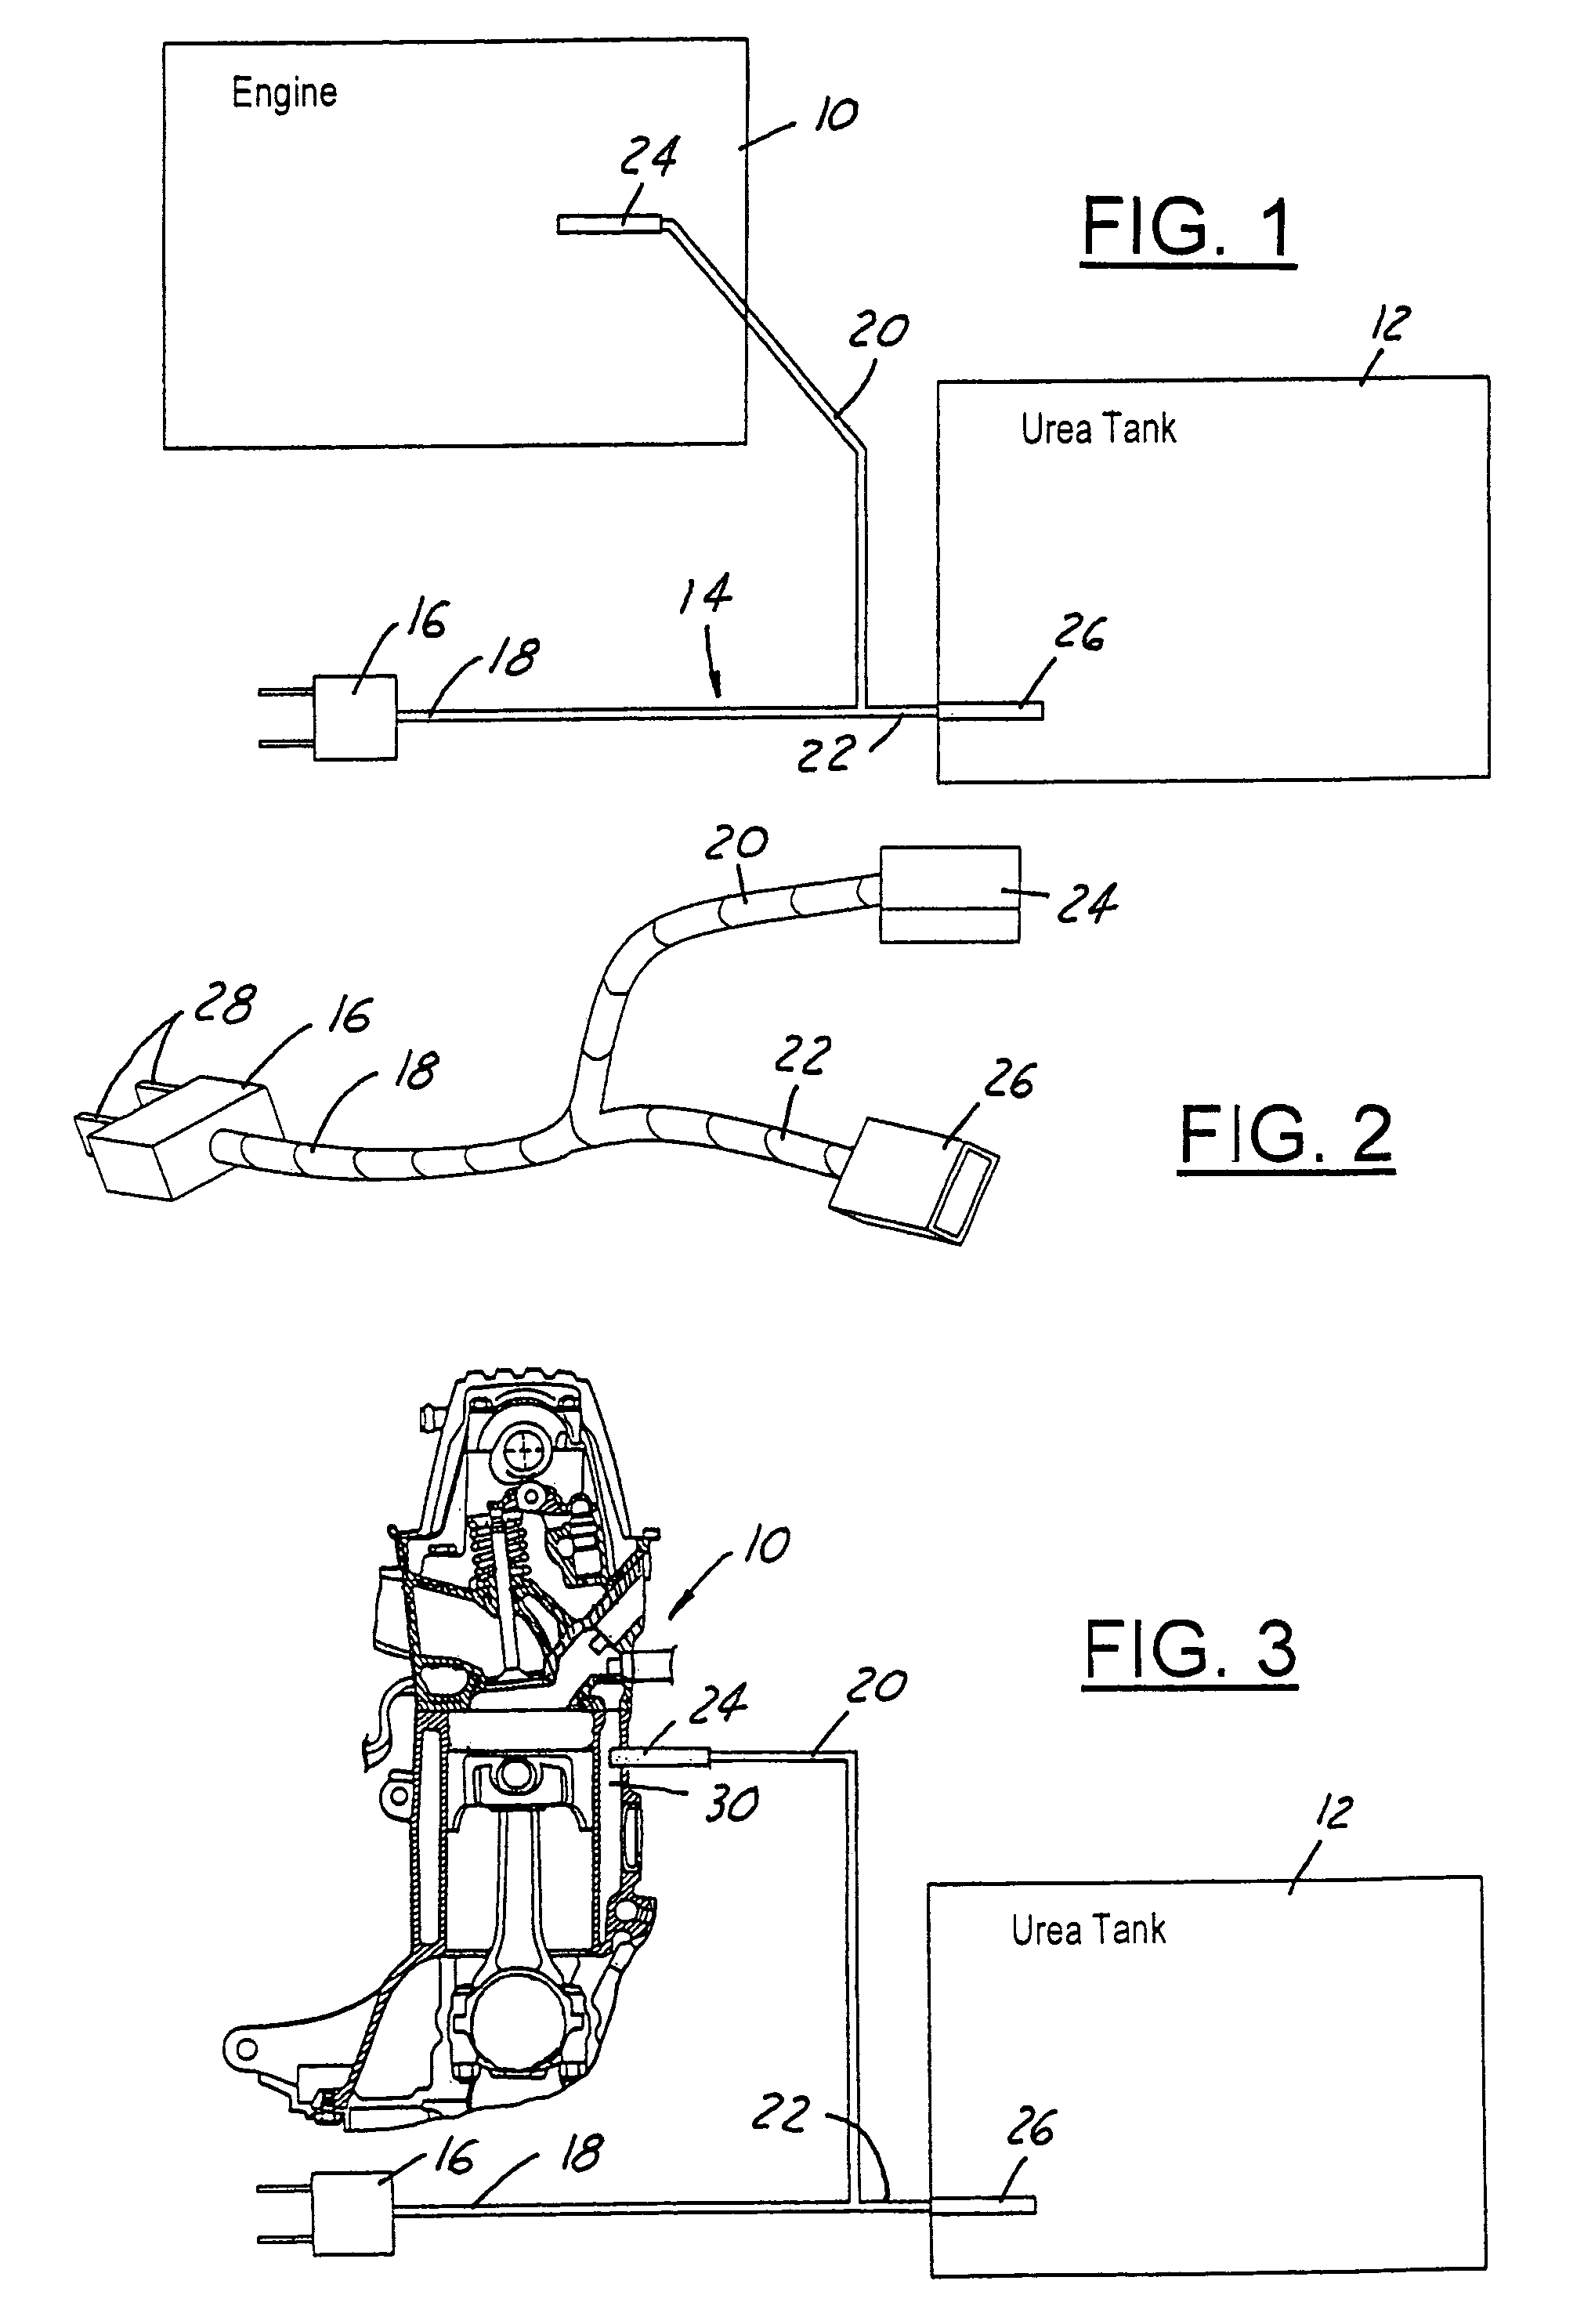 Heater system for diesel engines having a selective catalytic reduction system